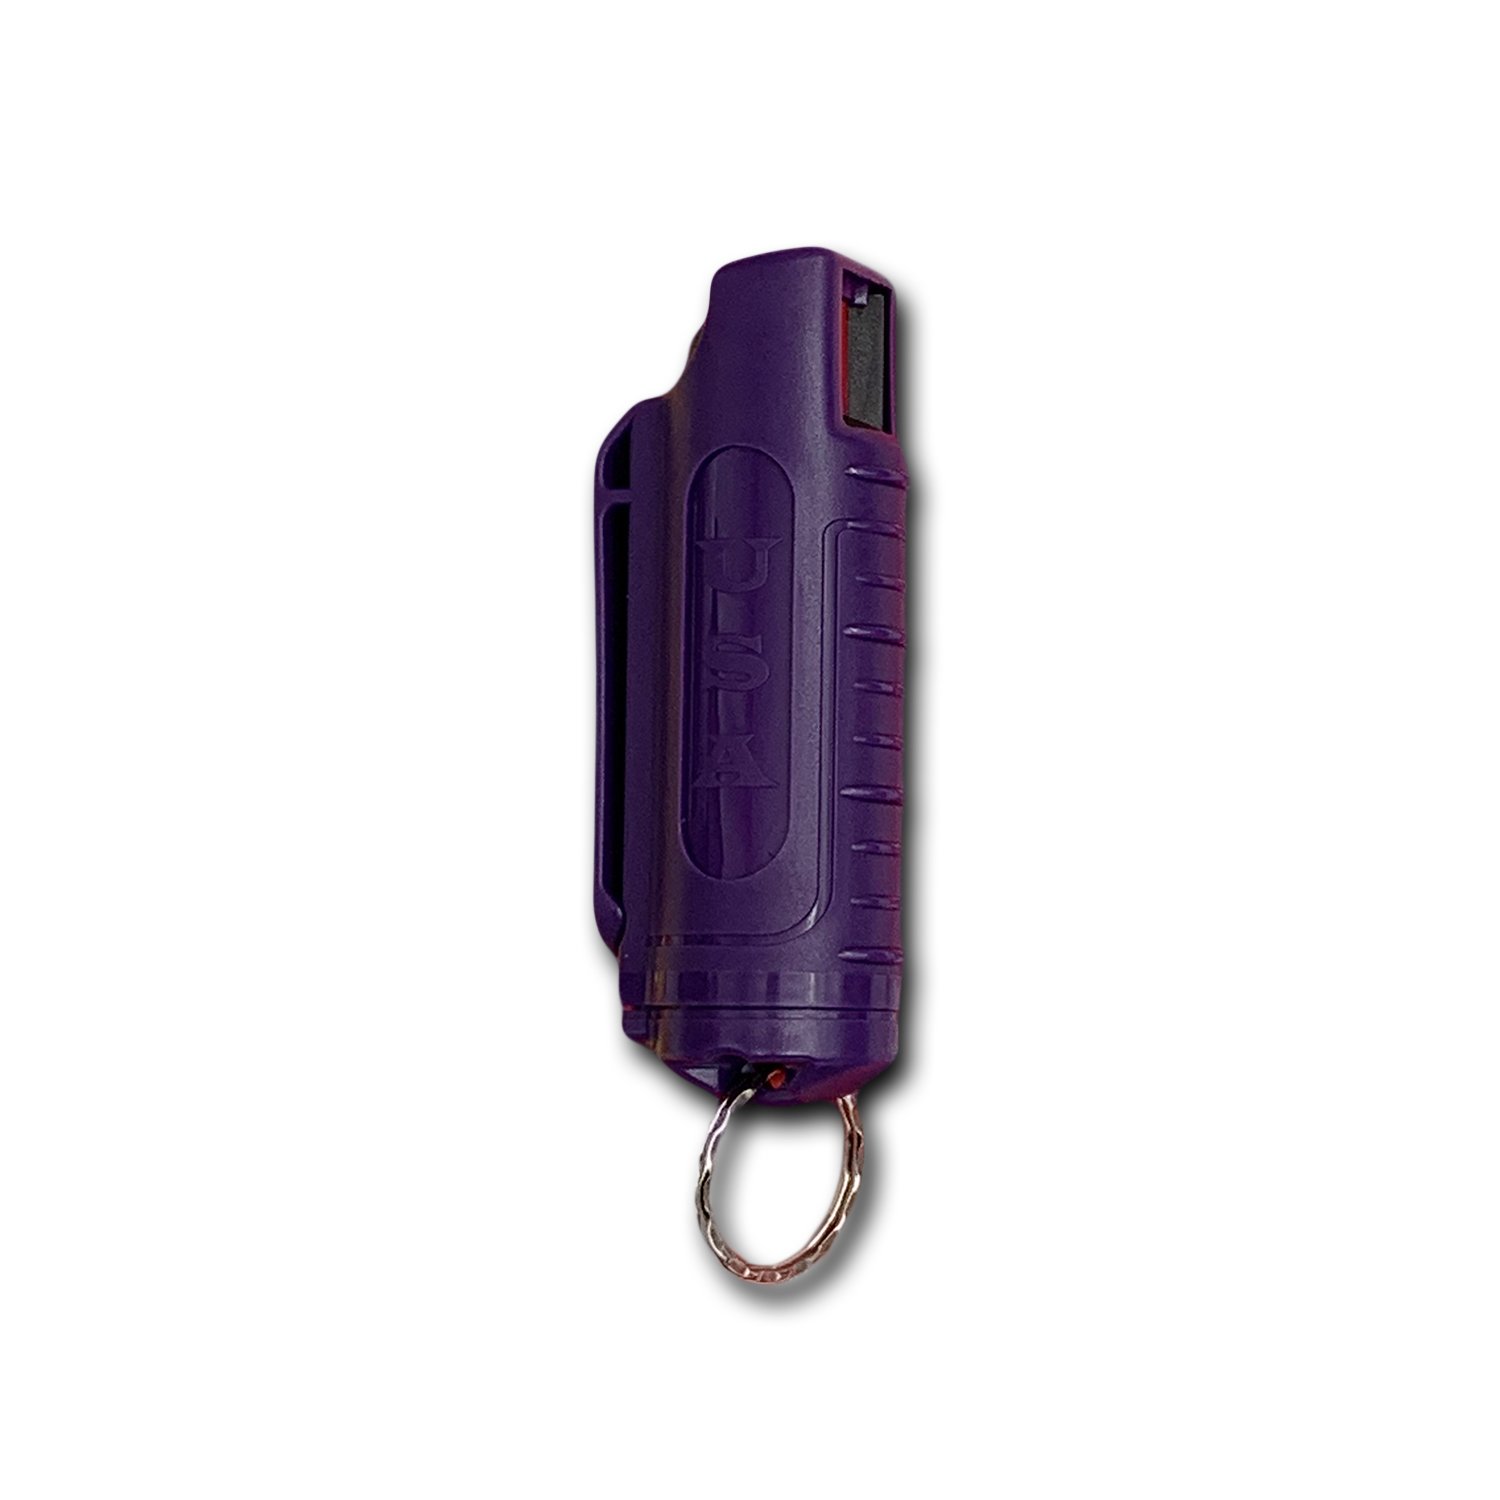 1/2 Ounce Leather Pouch Keychain Pepper Spray, Purple